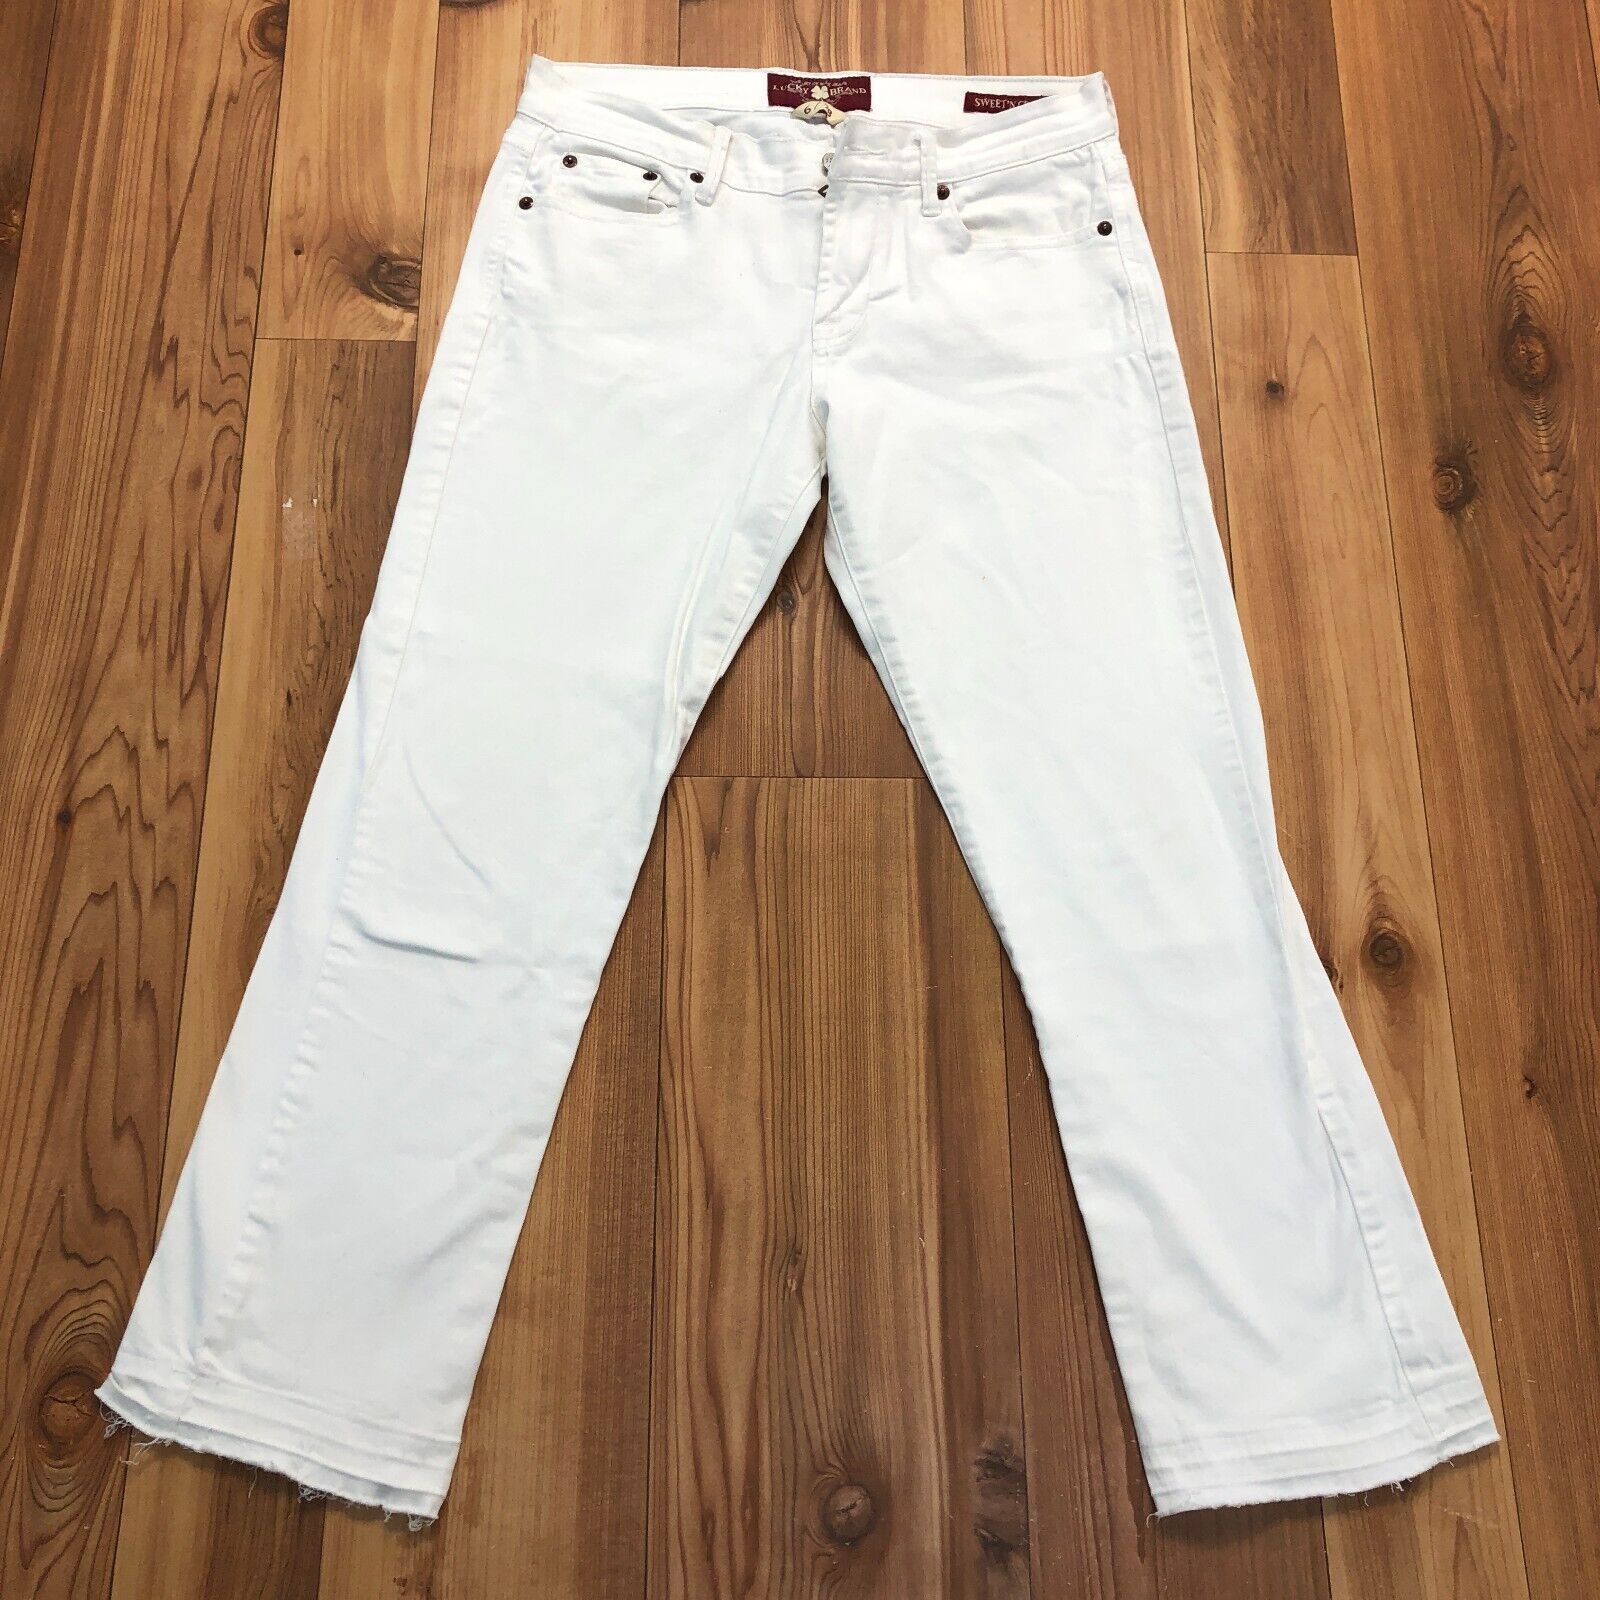 Lucky Brand White Solid Cotton Sweet'N Crop Jeans Women's Size 2/28